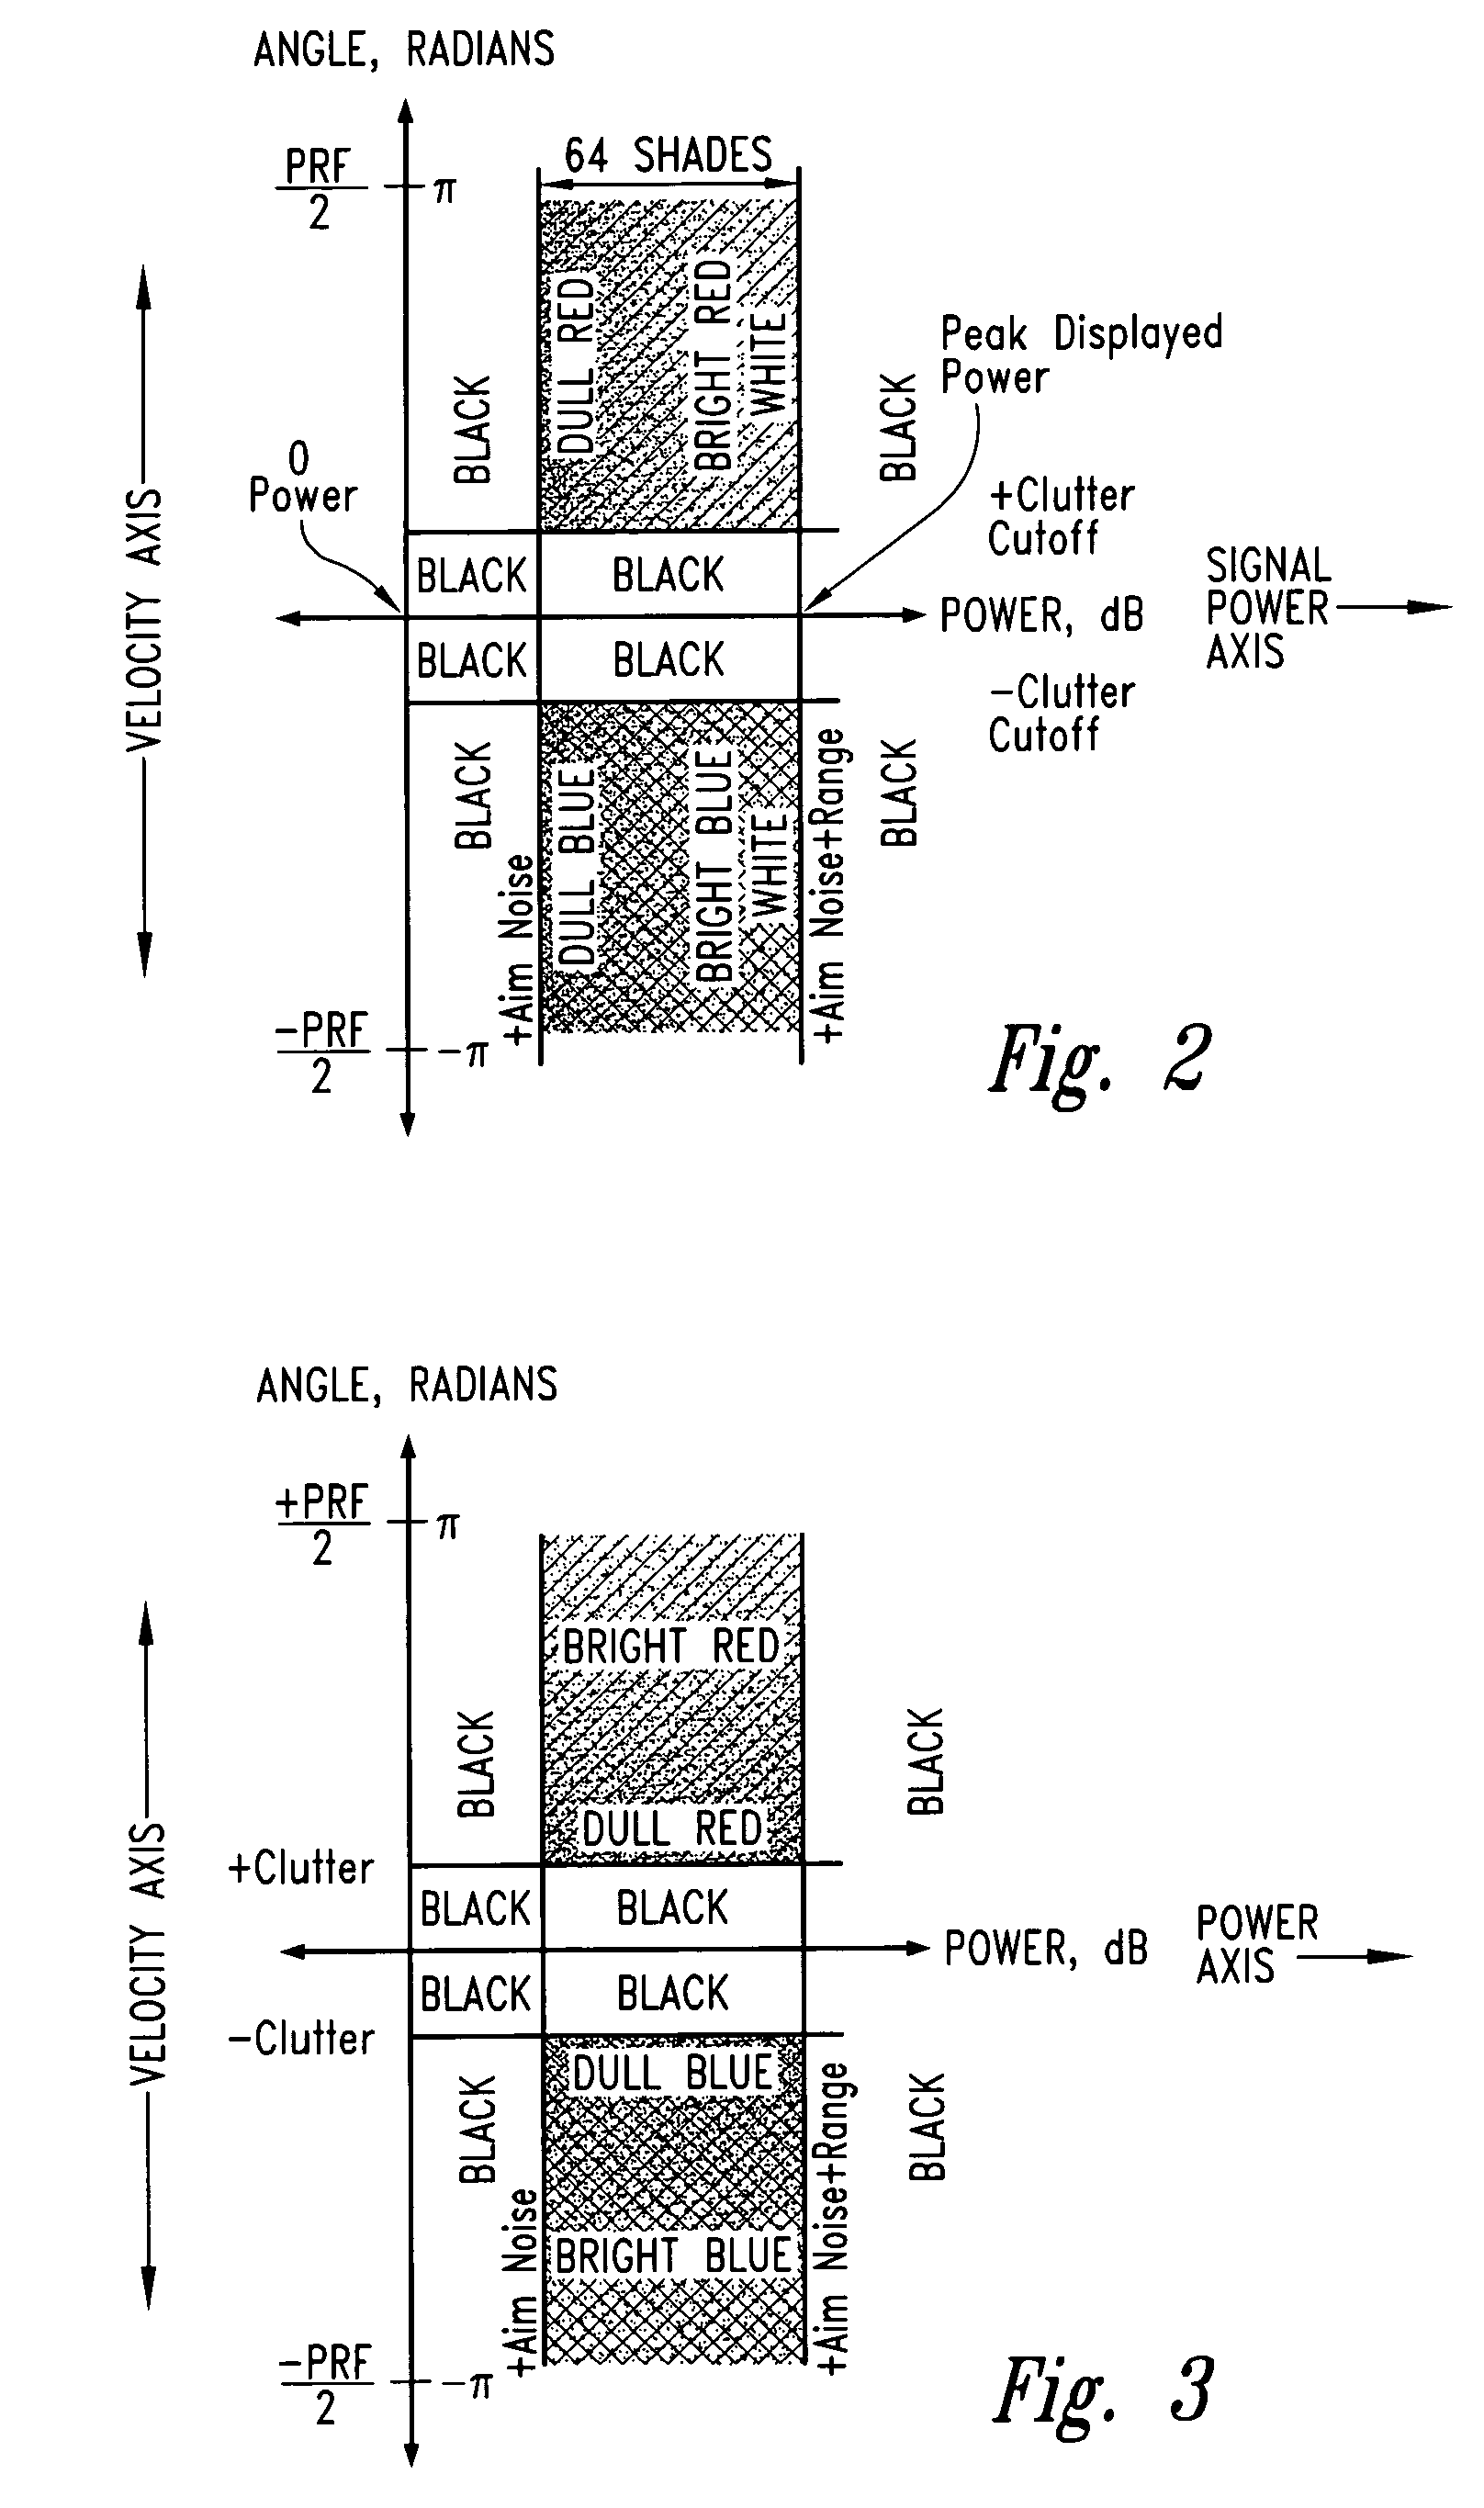 Doppler ultrasound method and apparatus for monitoring blood flow